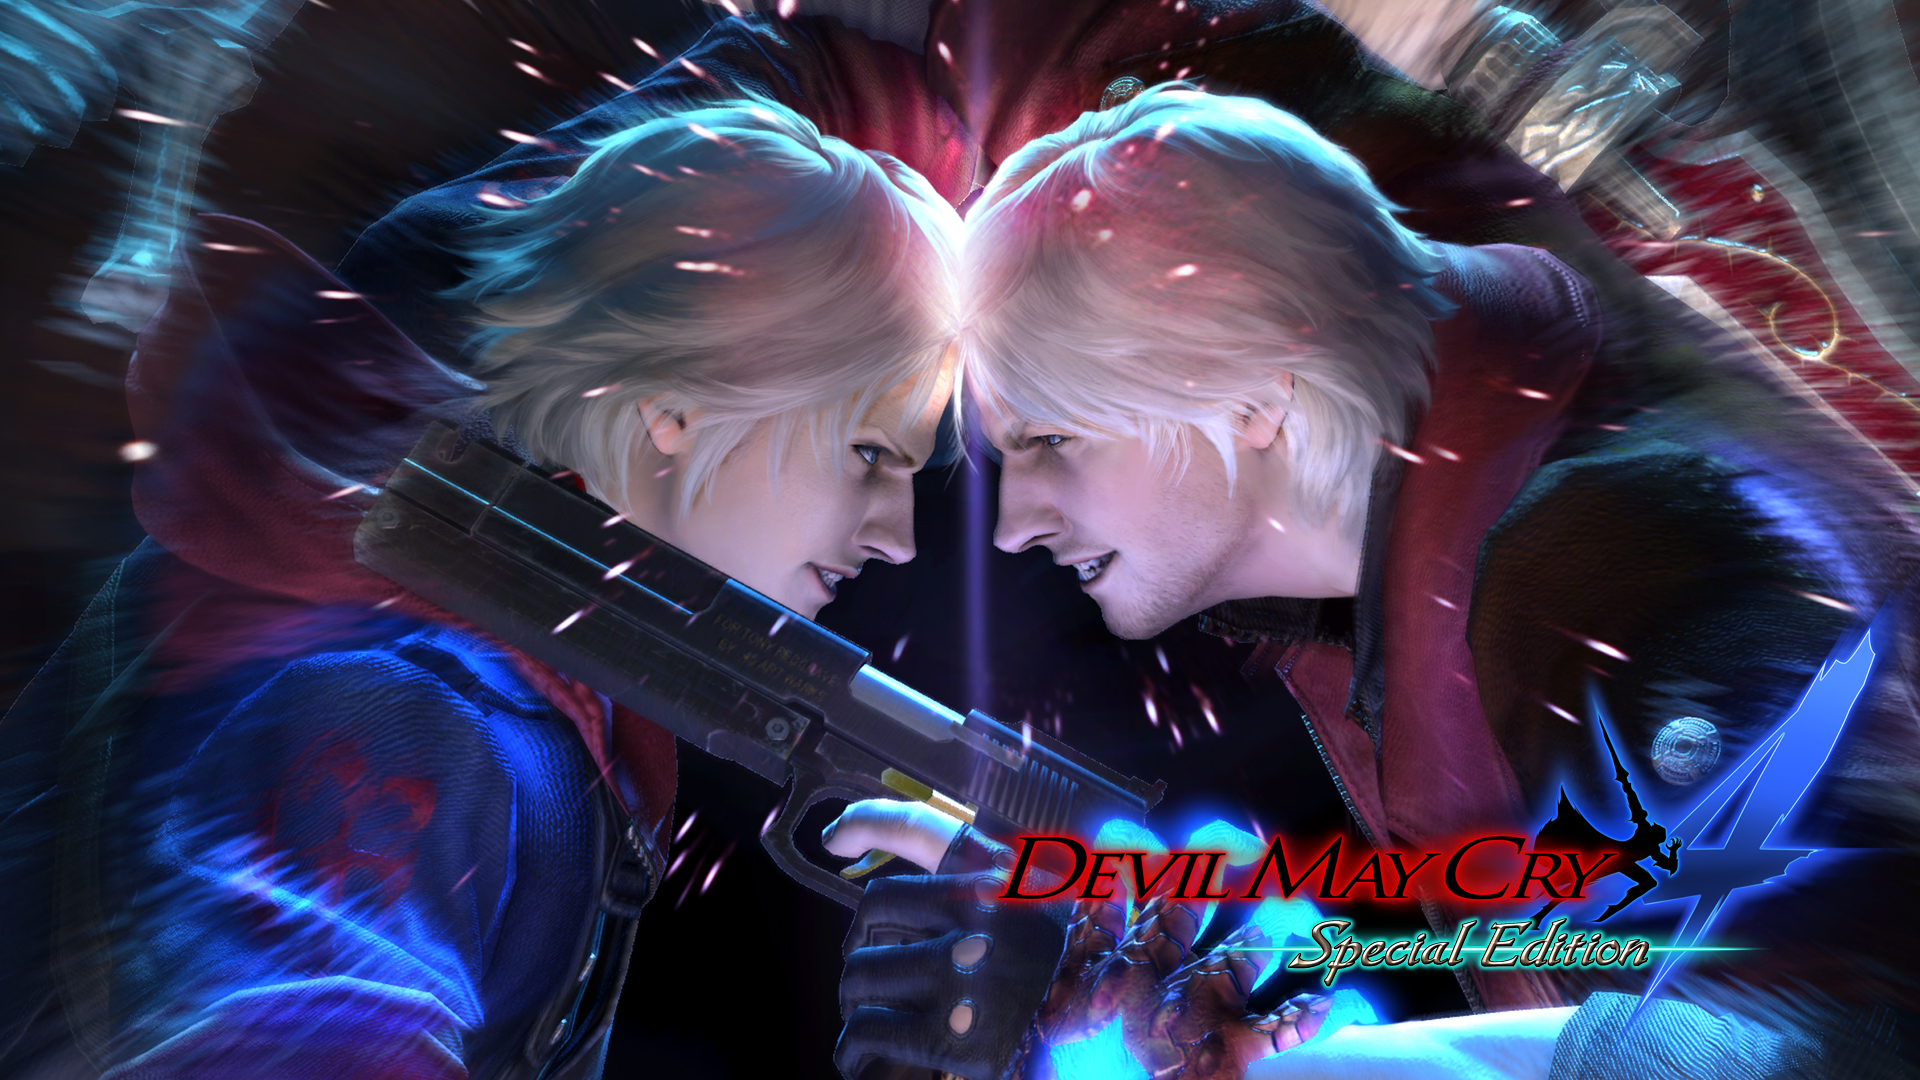 Save 25% on Devil May Cry 5 - Playable Character: Vergil on Steam